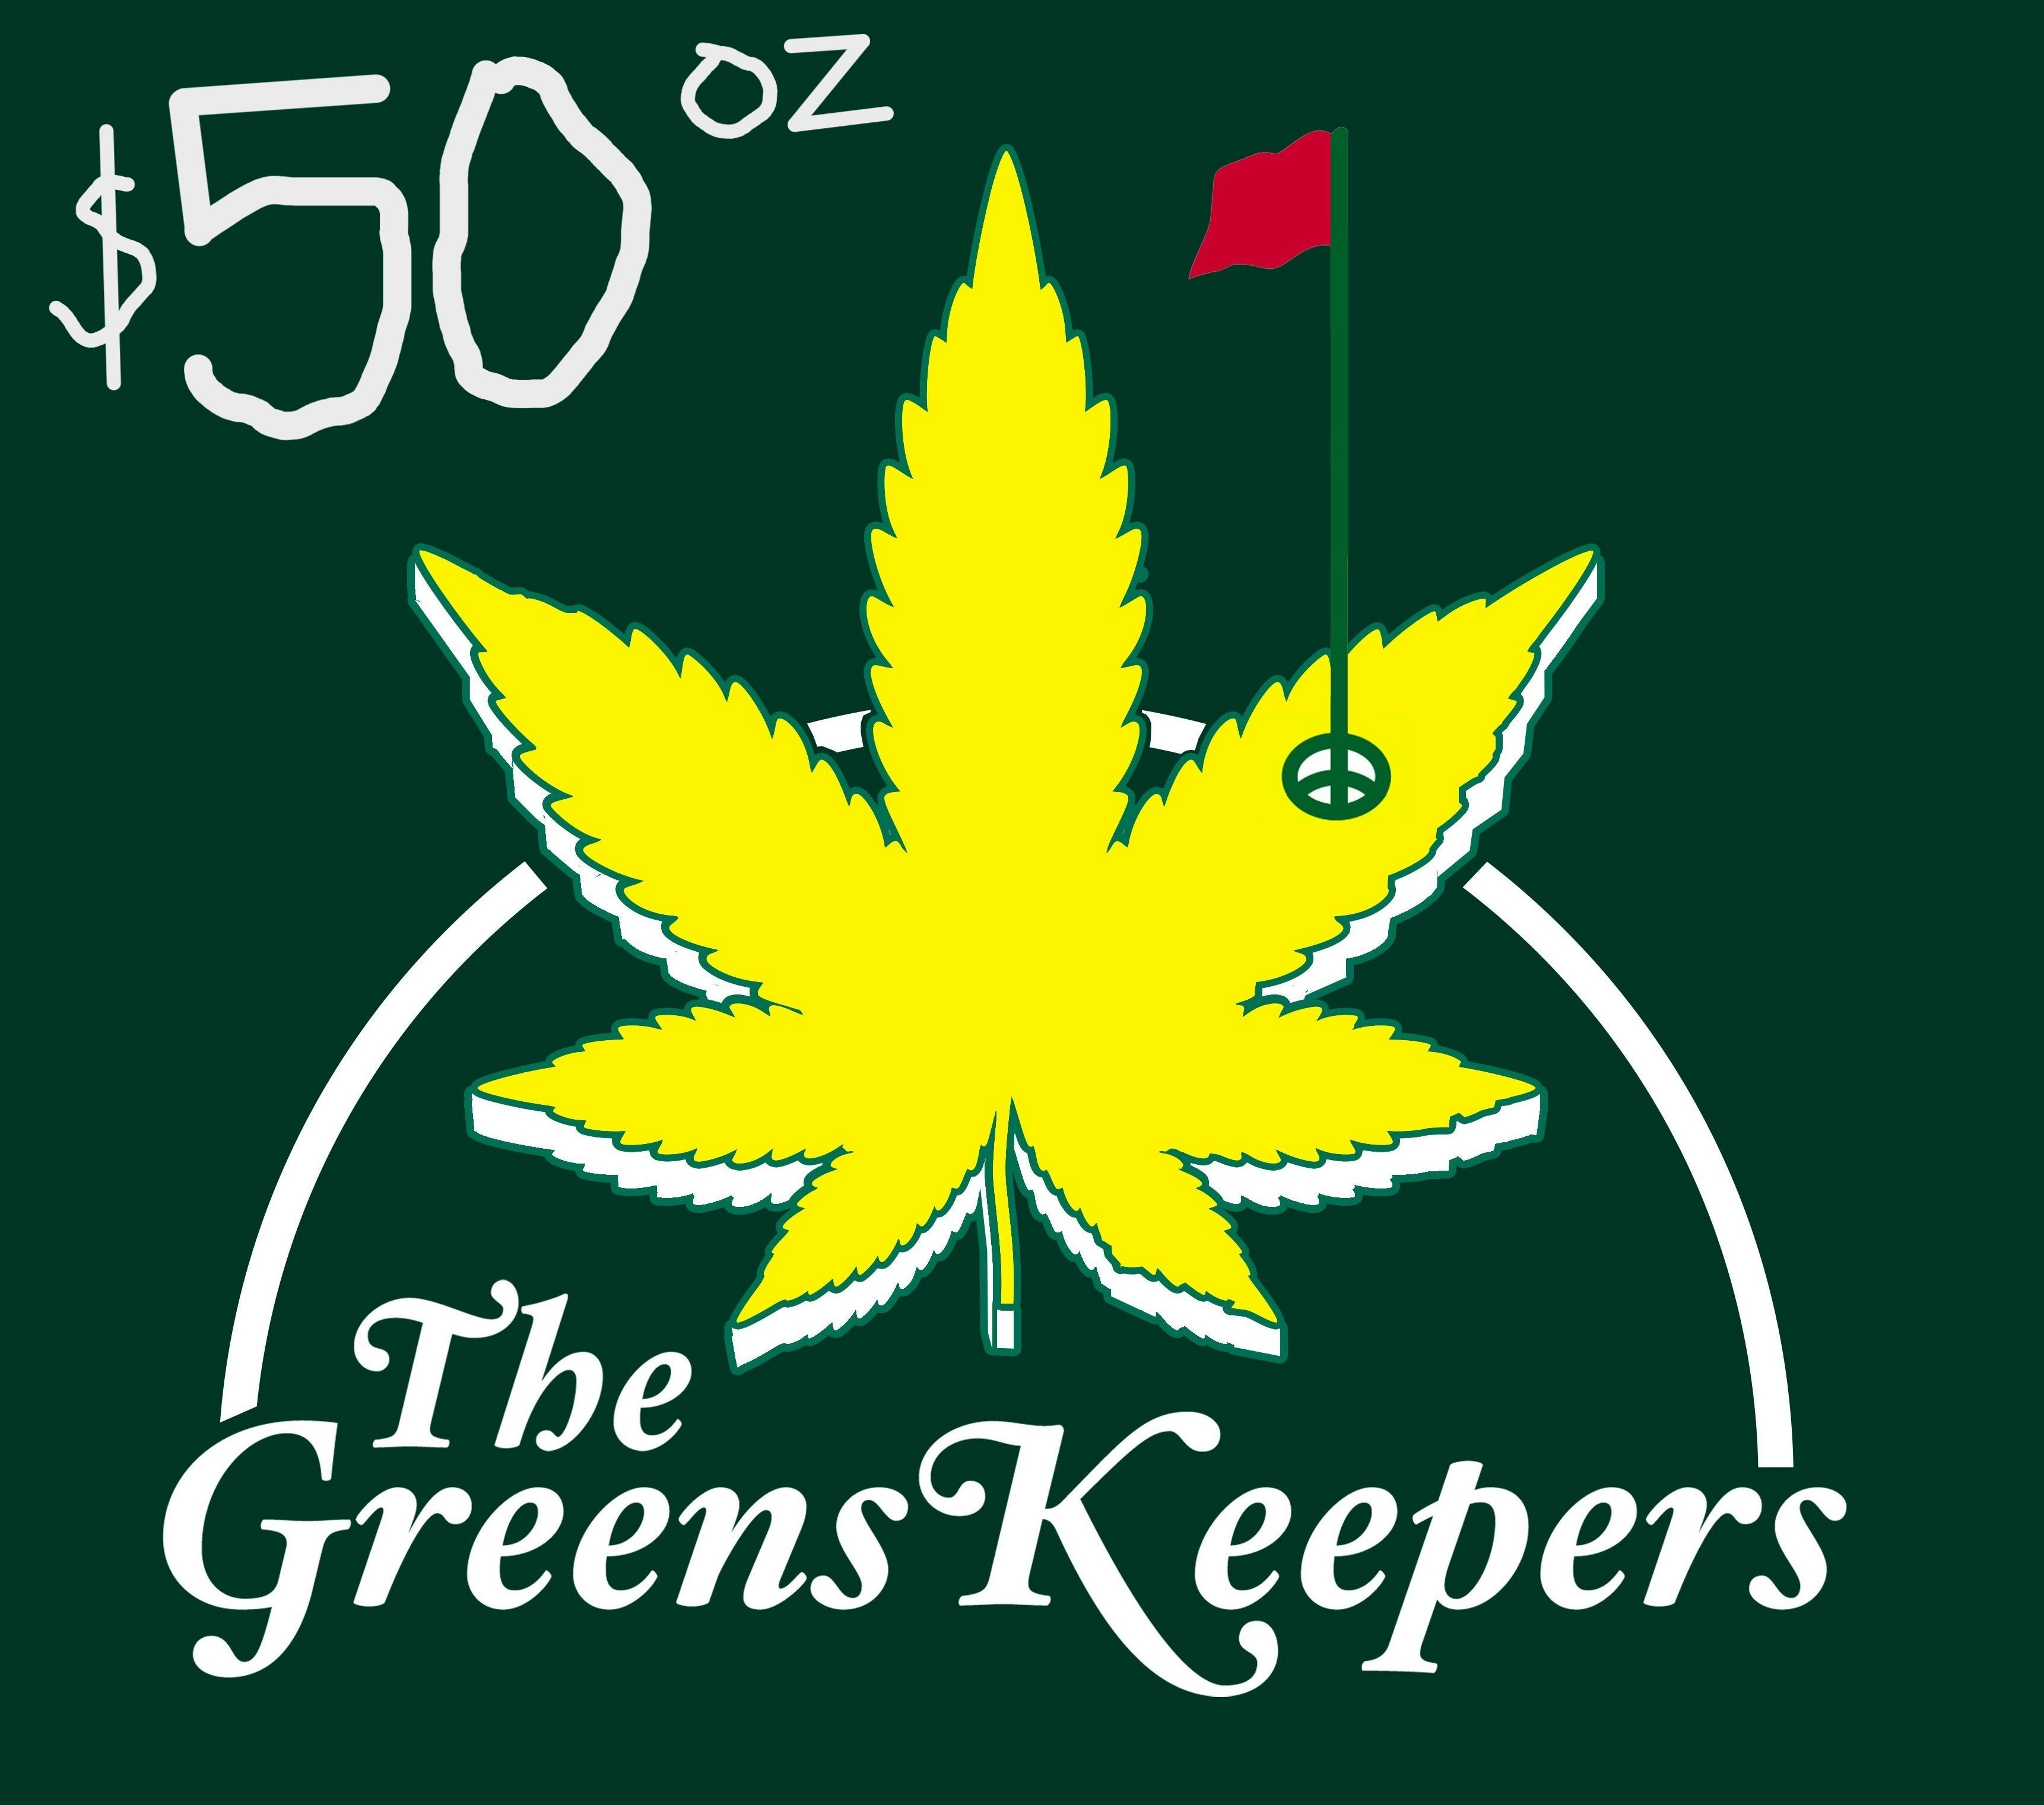 The GreensKeepers logo